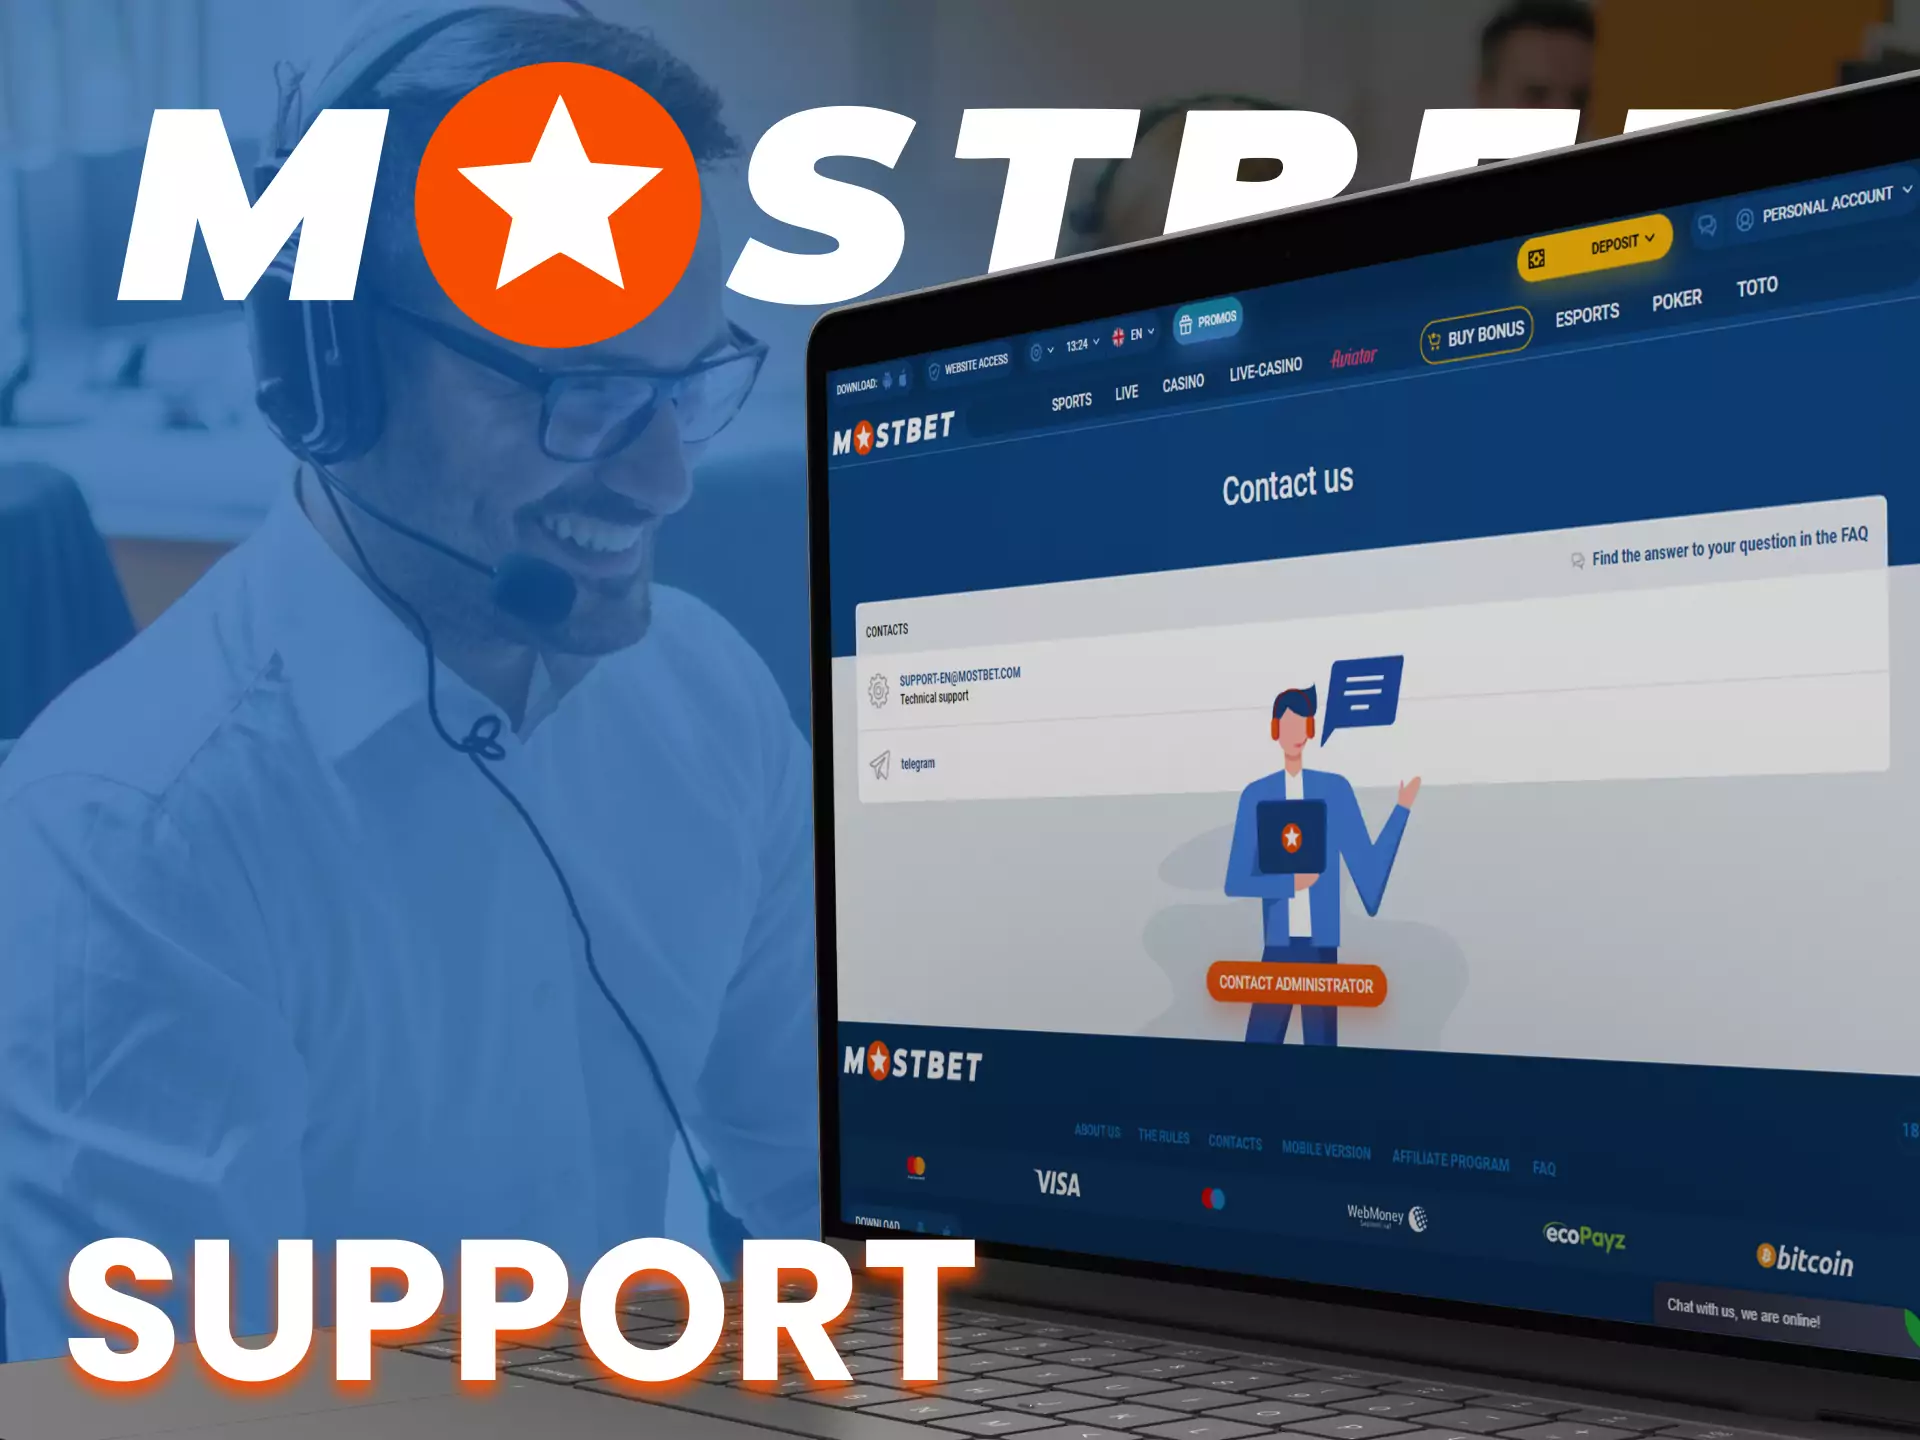 At Mostbet, support users around the clock.